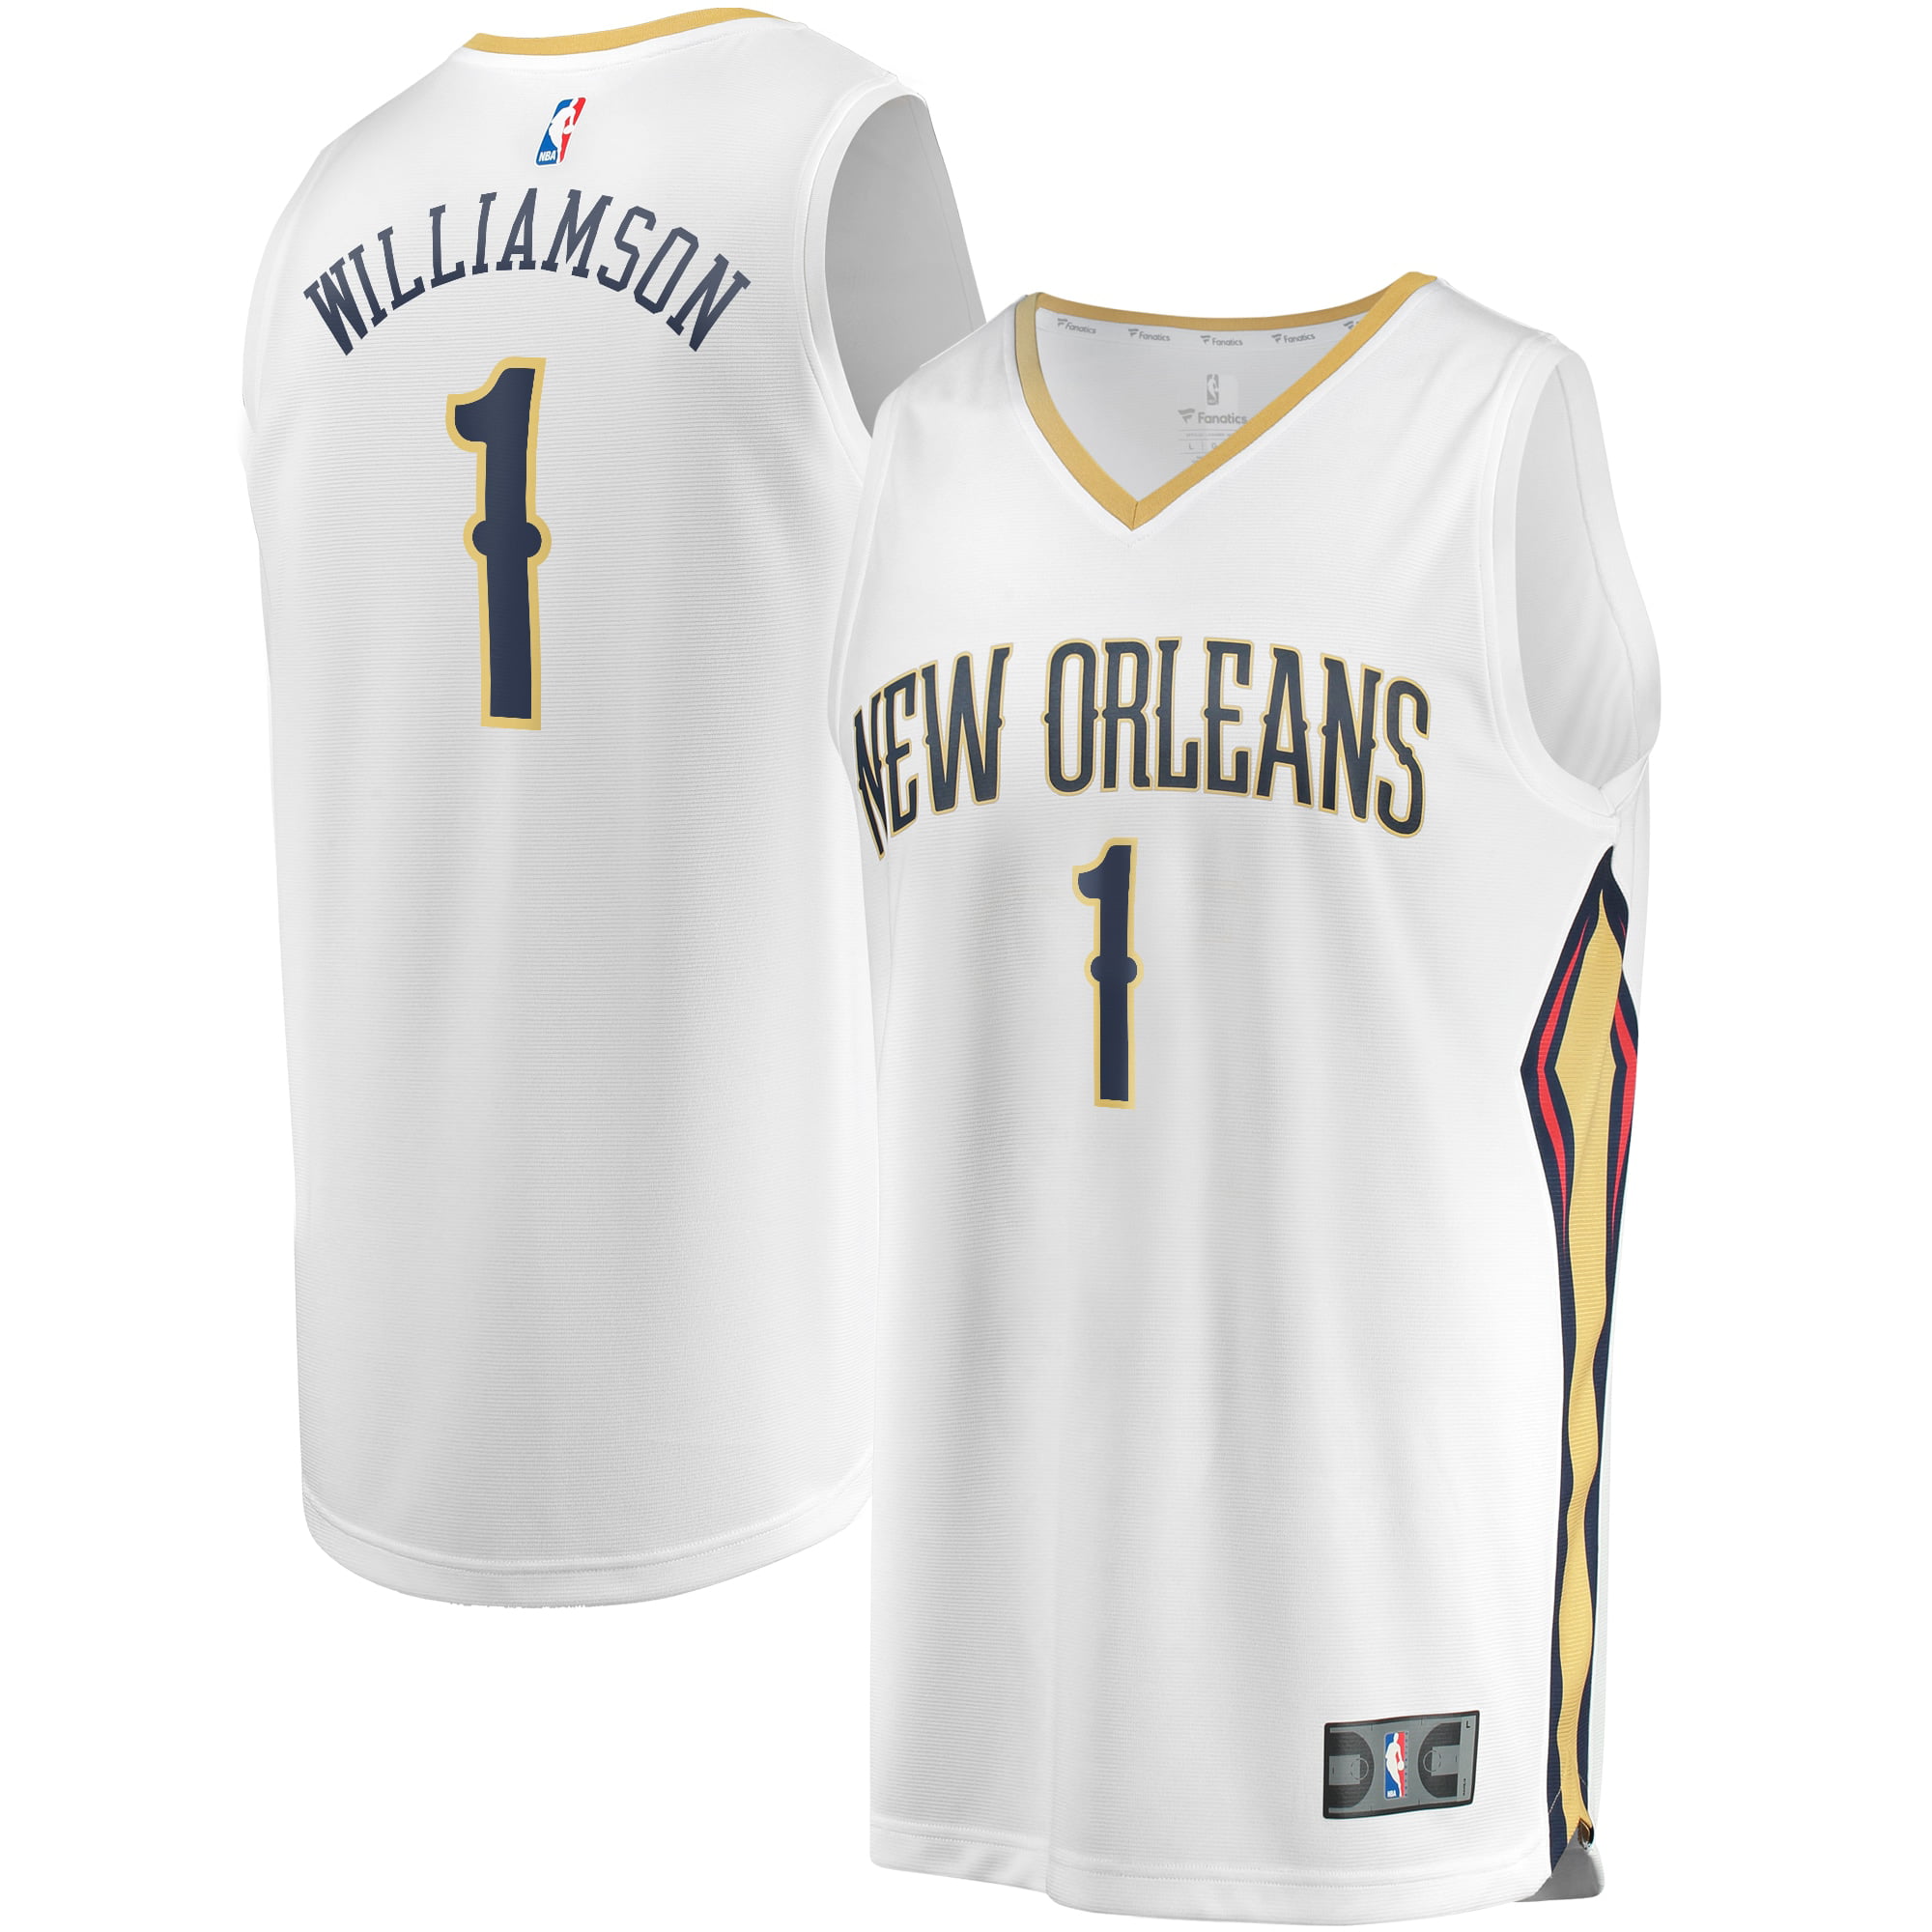 zion williamson youth jersey